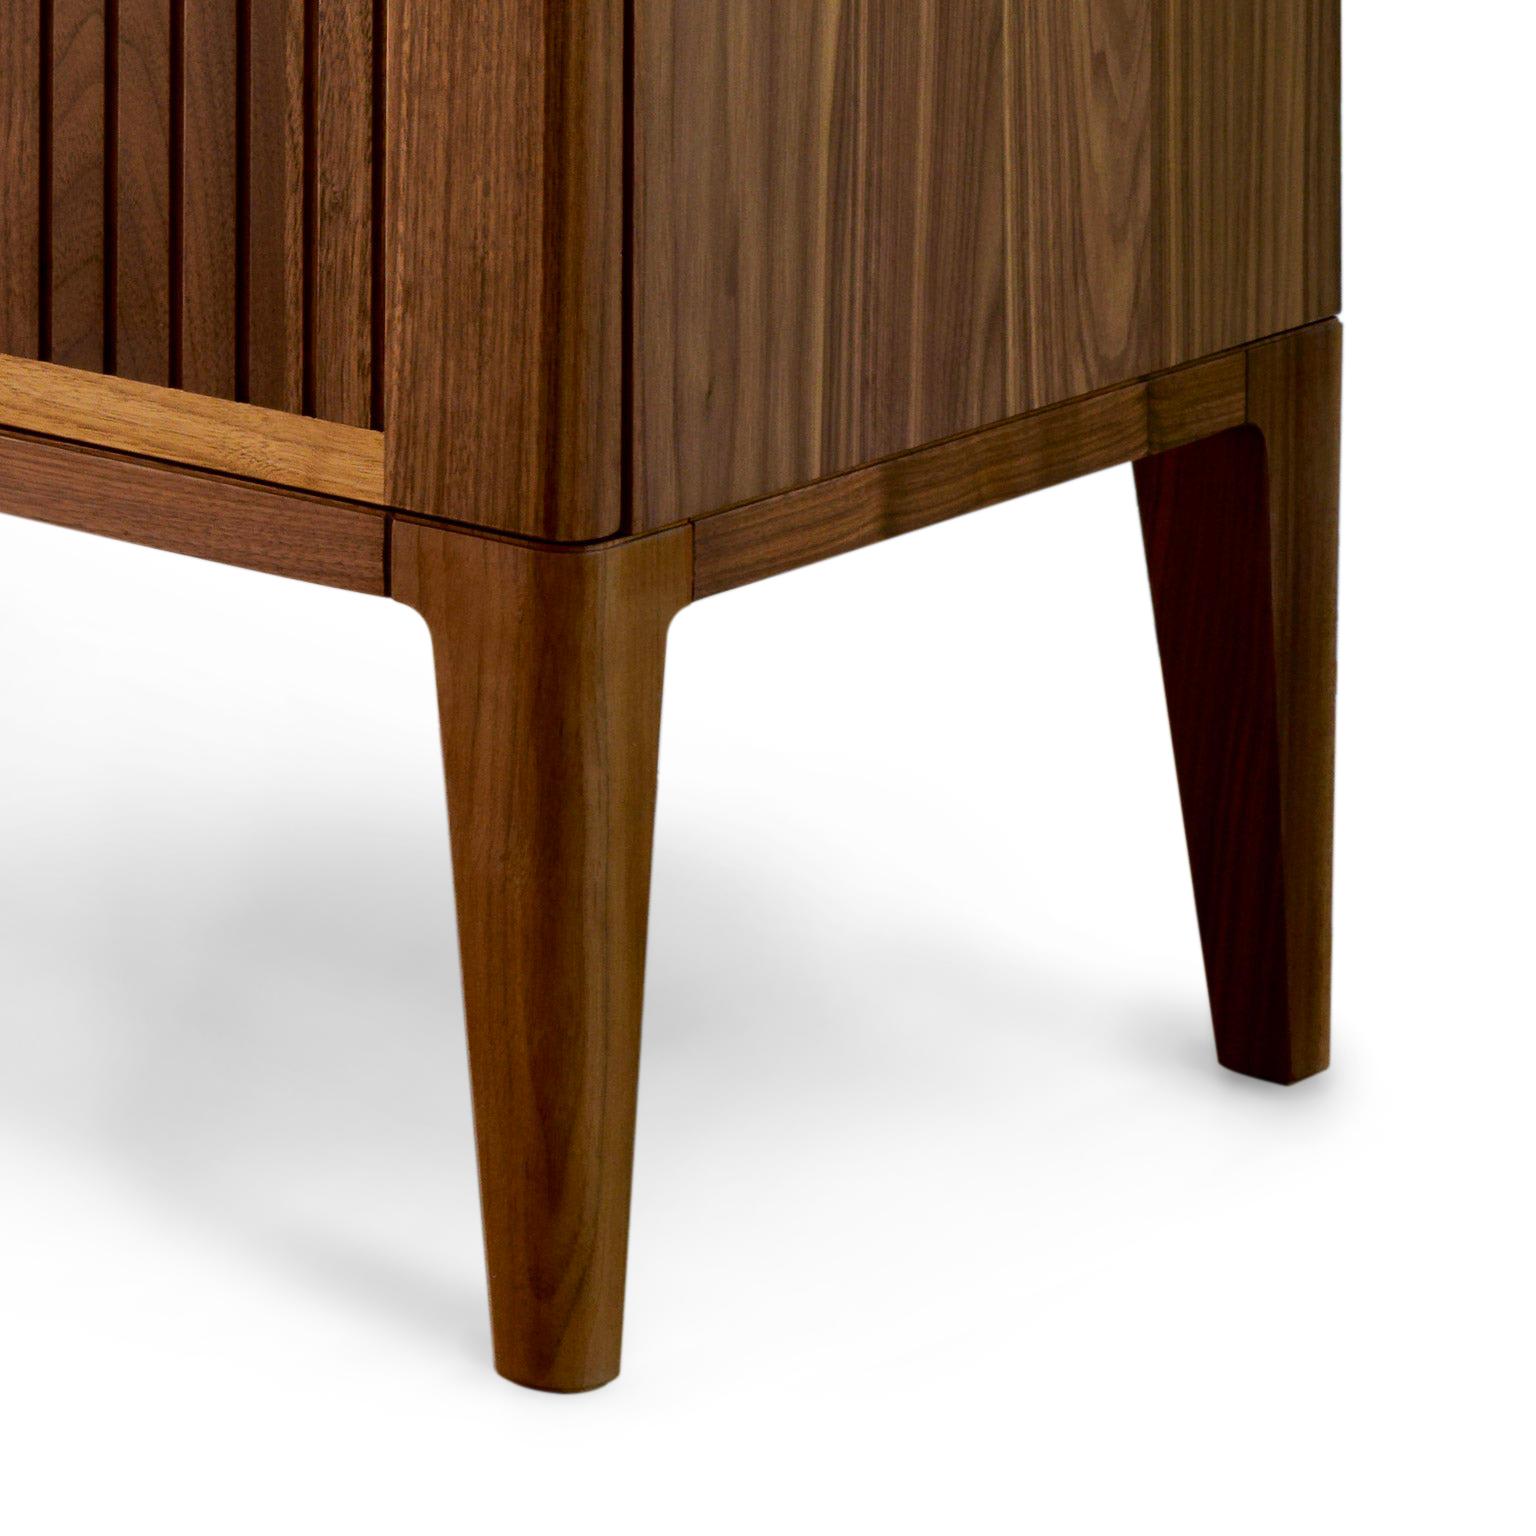 Eleva Solid Wood Bedside table, Walnut in Hand-Made Natural Finish, Contemporary For Sale 2